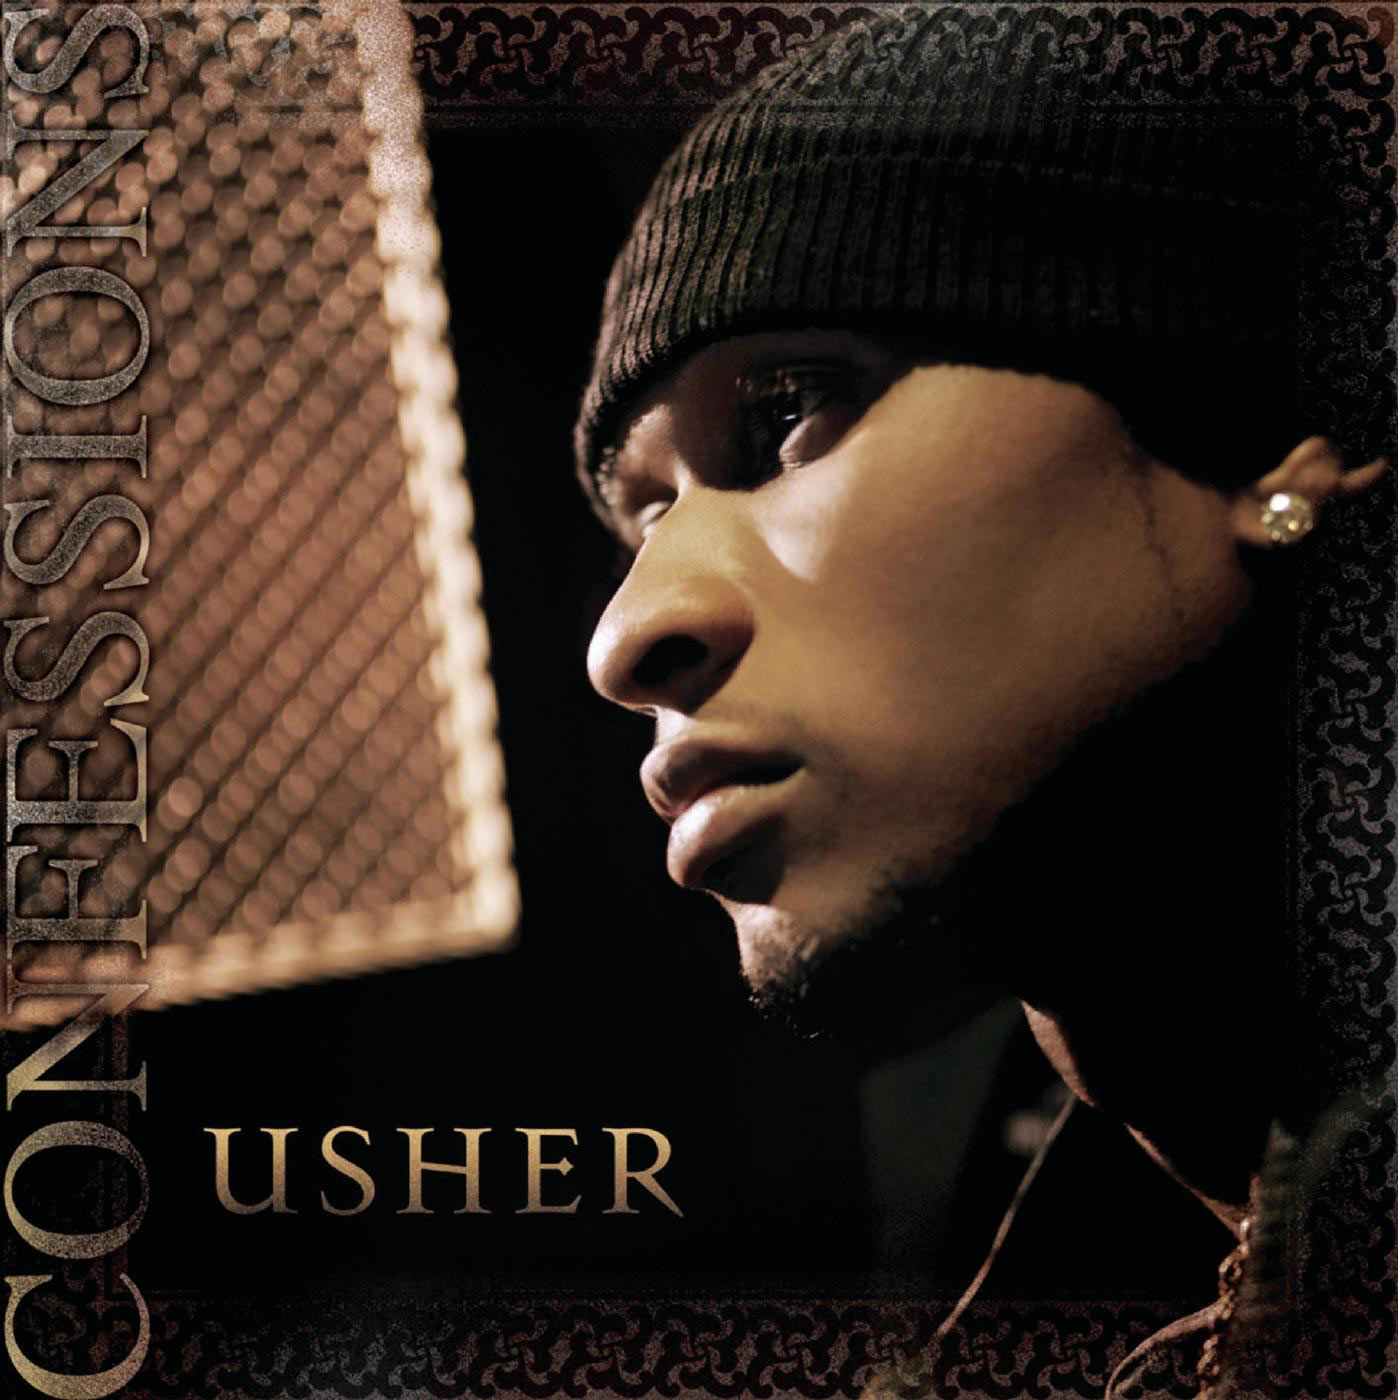 Usher – Confessions (Expanded Edition)【44.1kHz／16bit】英国区-OppsUpro音乐帝国